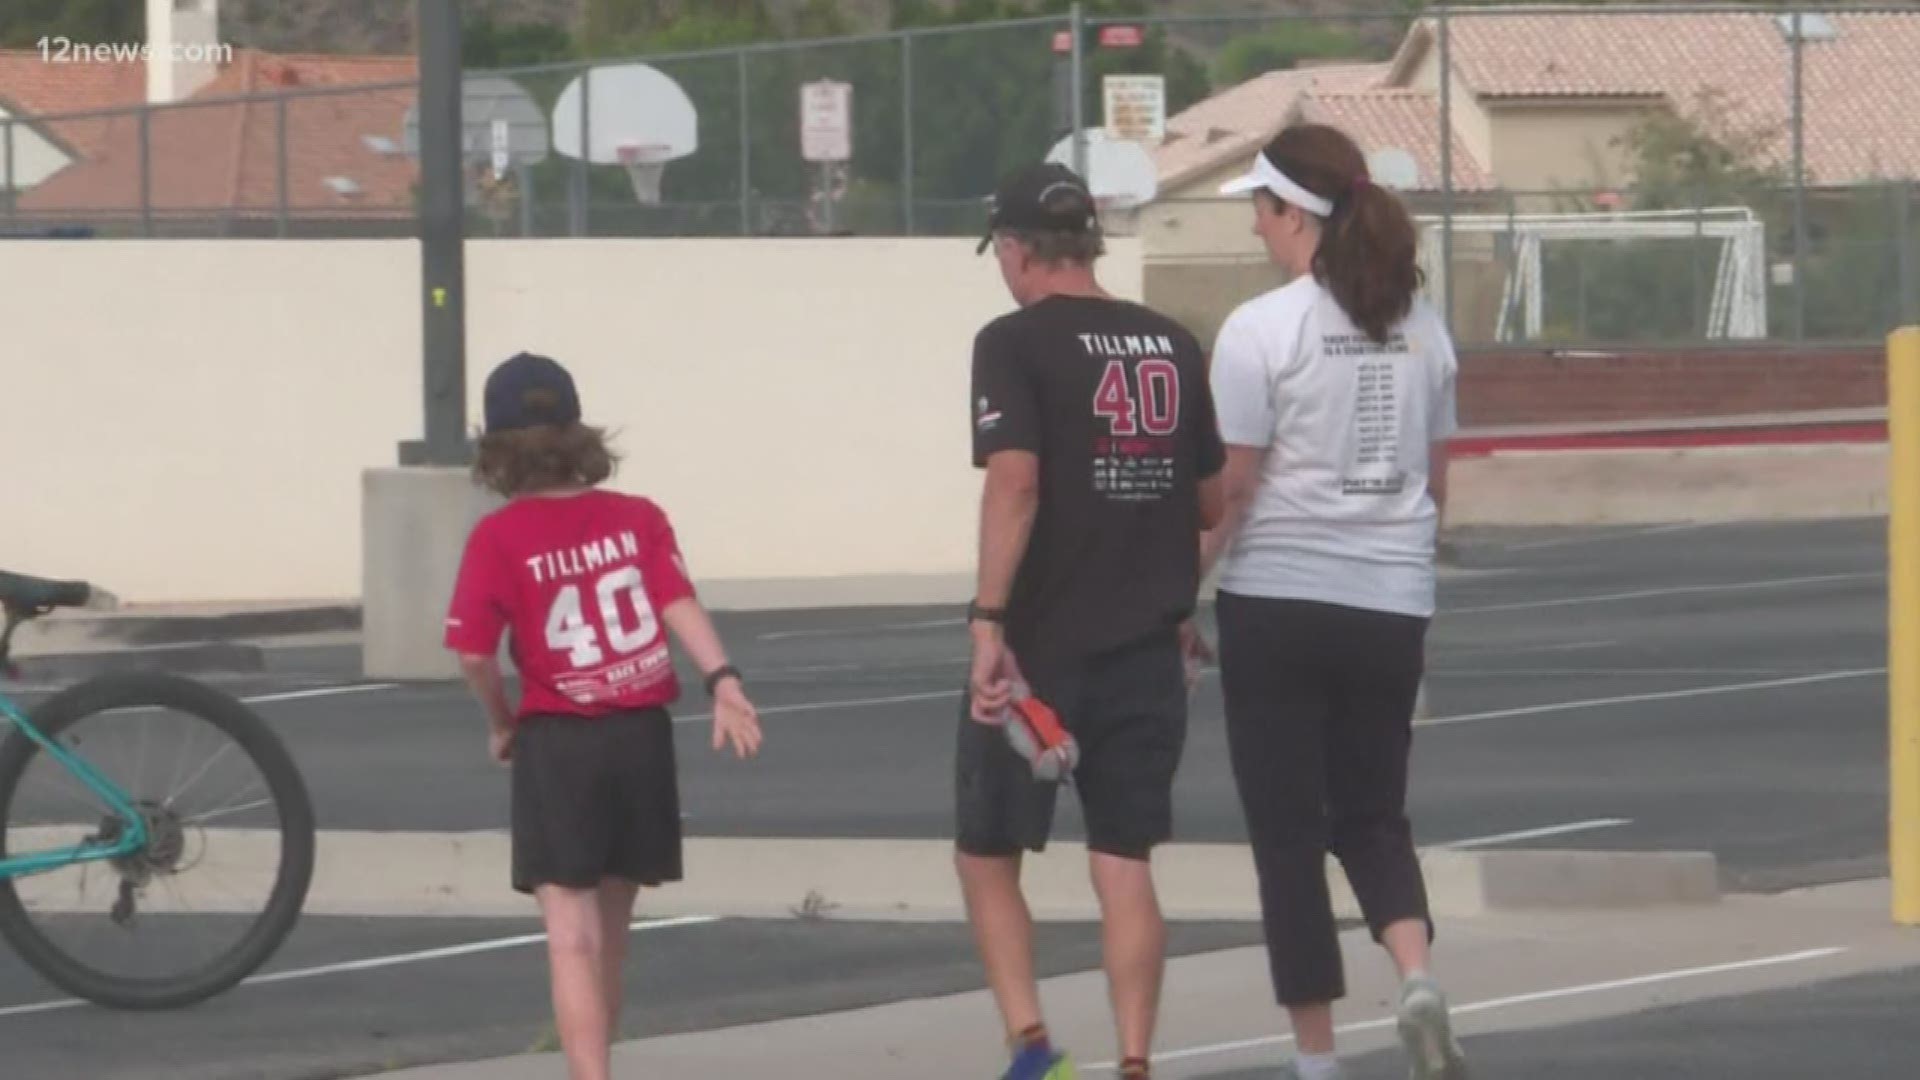 While people couldn't gather in Tempe for the annual run, plenty ran the race on their own to honor Pat Tillman on Saturday.